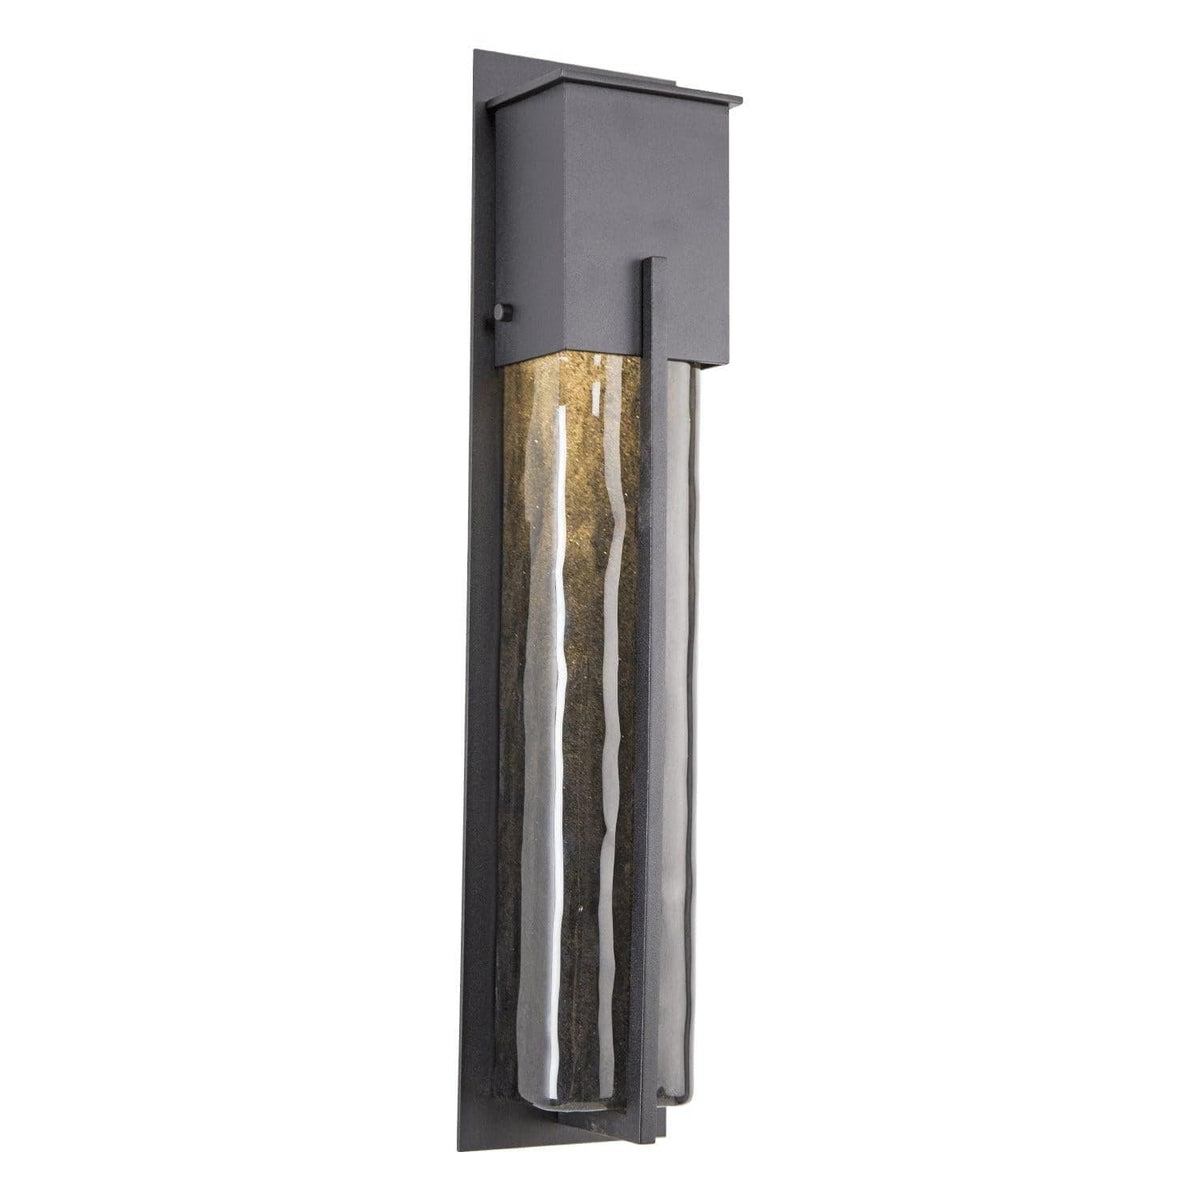 Hammerton Studio - Outdoor Tall Square Cover Sconce with Metalwork - ODB0055-23-TB-SG-L2 | Montreal Lighting & Hardware